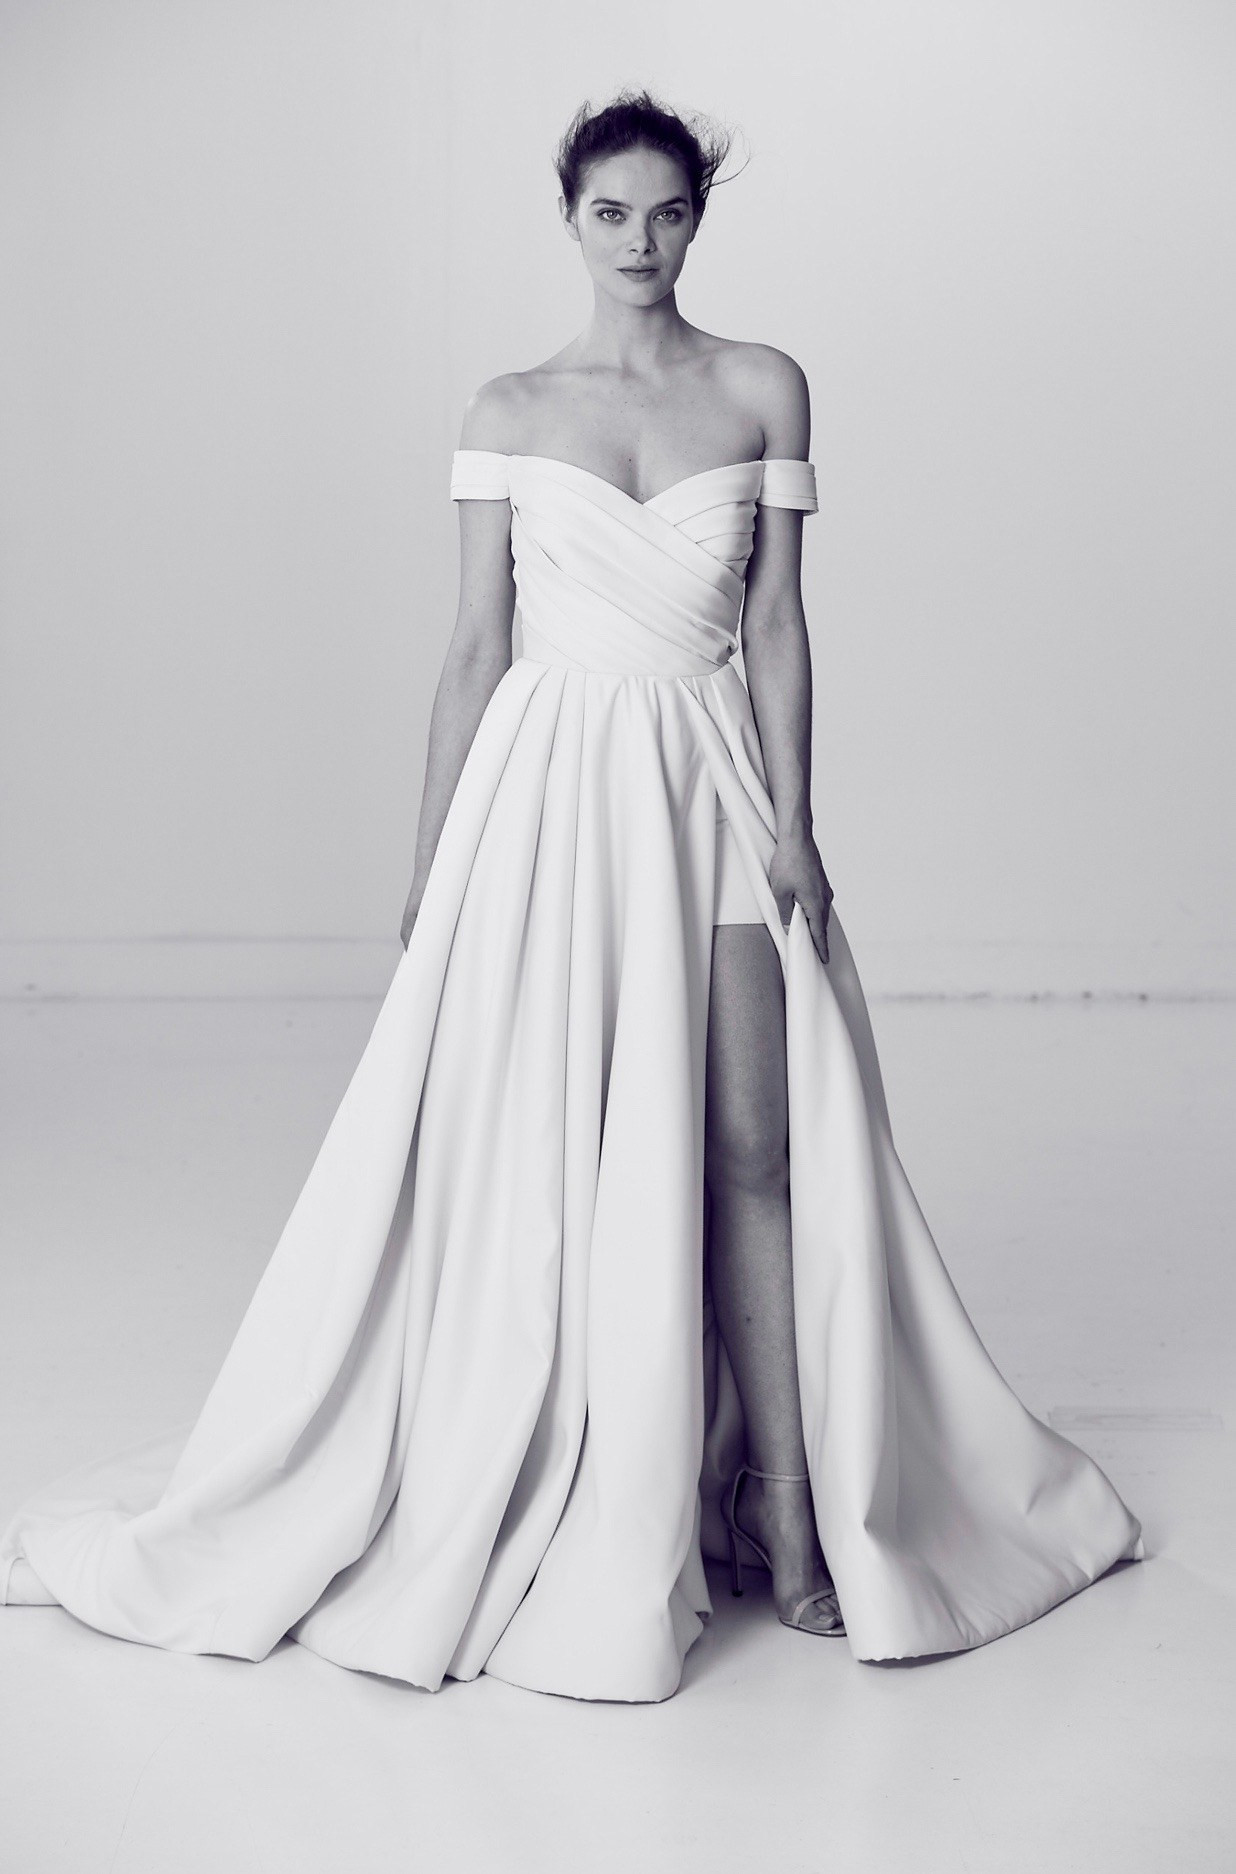 Pinterest Wedding Gowns
 Brand New Wedding Dresses That Will Be All Over Pinterest